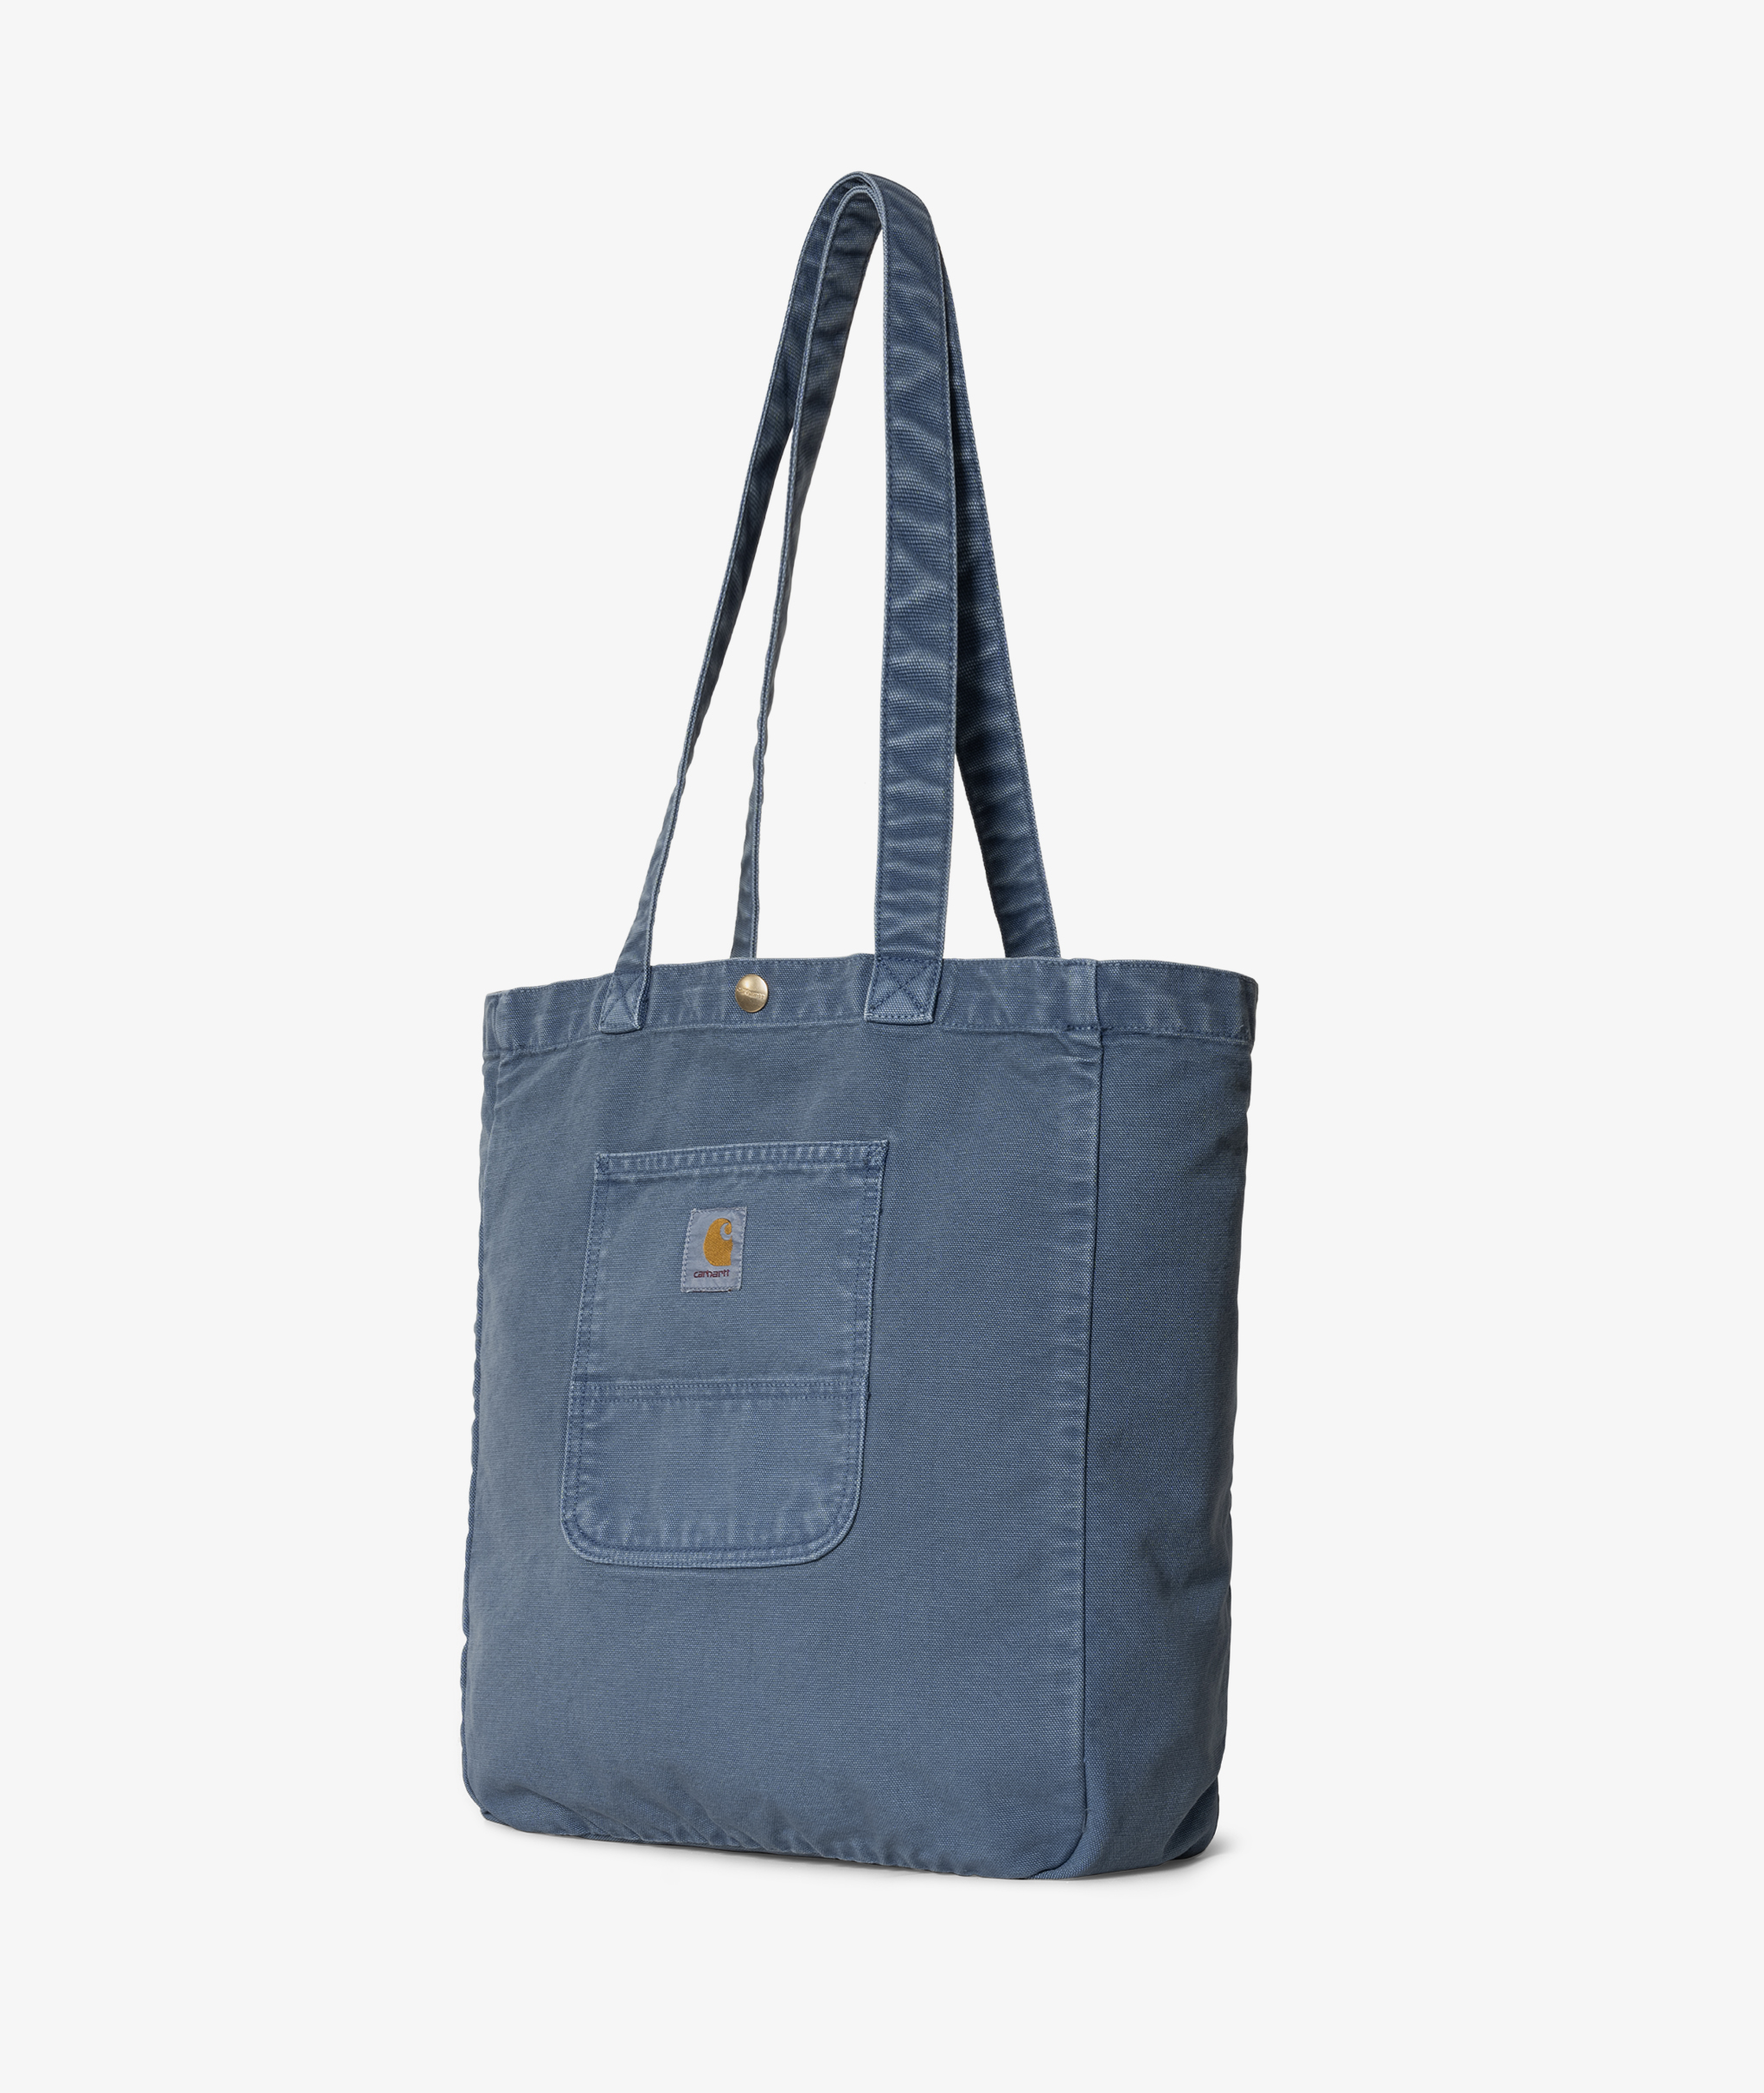 Norse Store | Shipping Worldwide - Carhartt WIP Bayfield Tote - Storm Blue